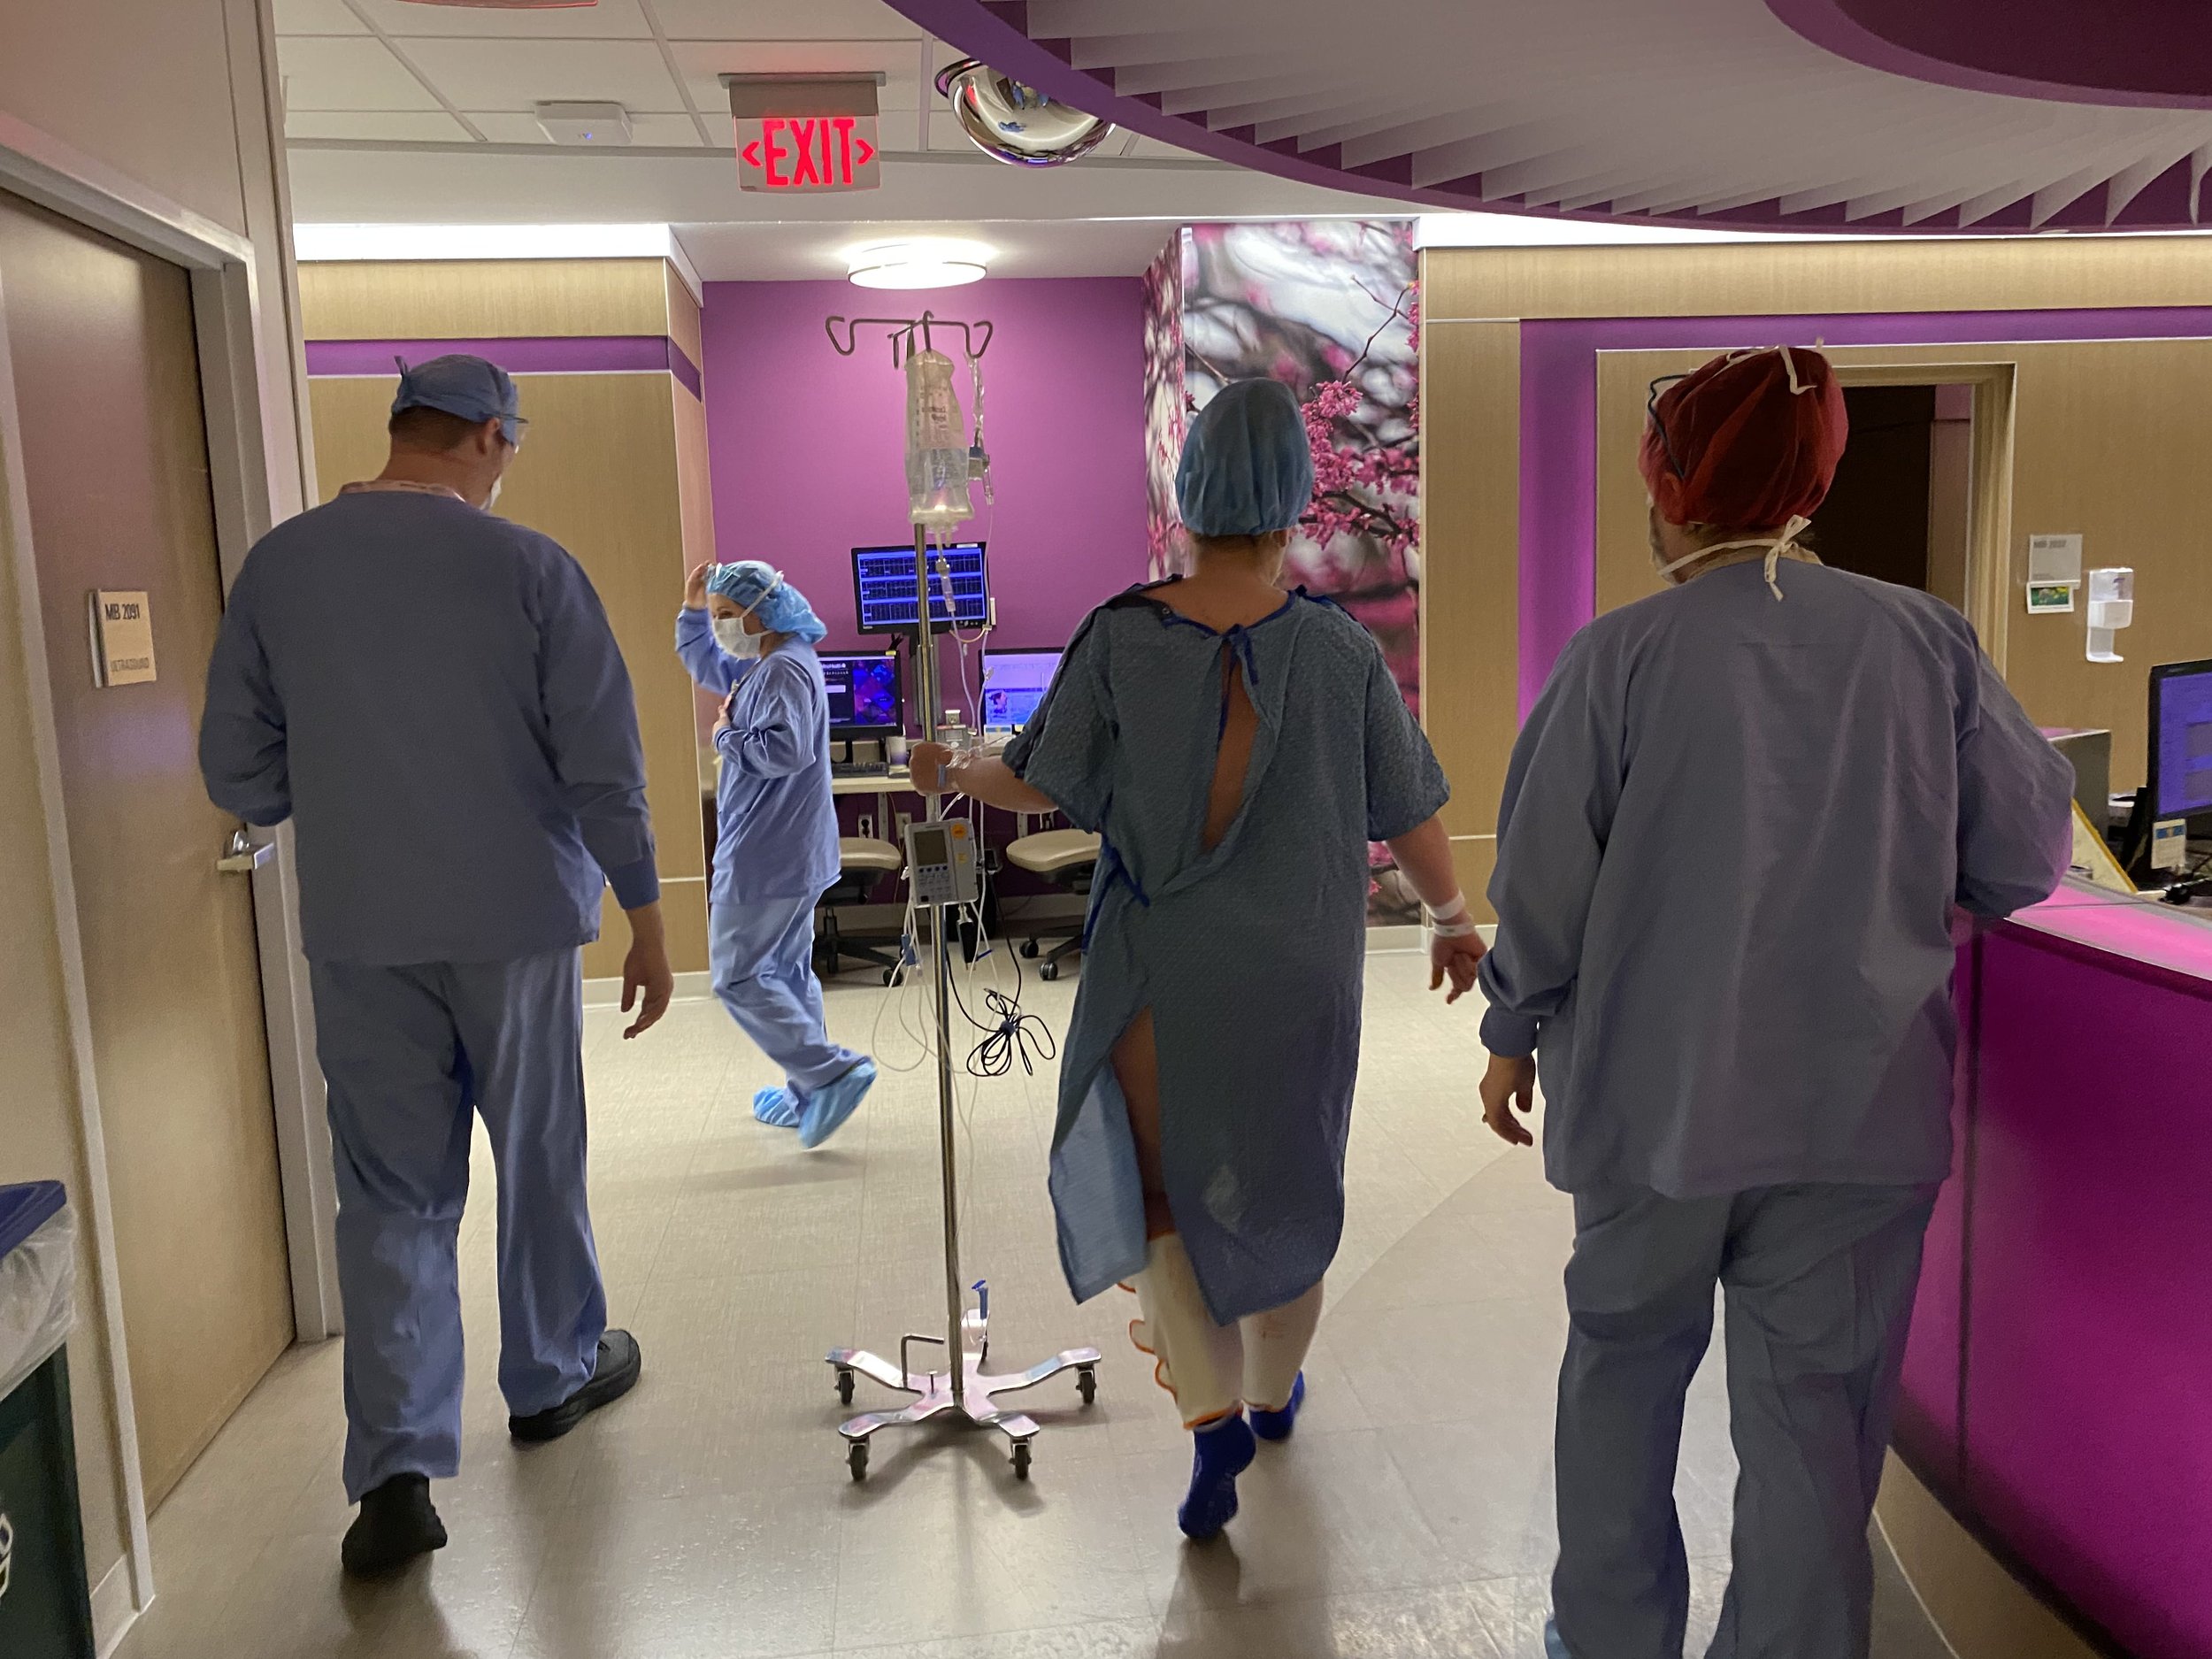 Walking to OR for surgery